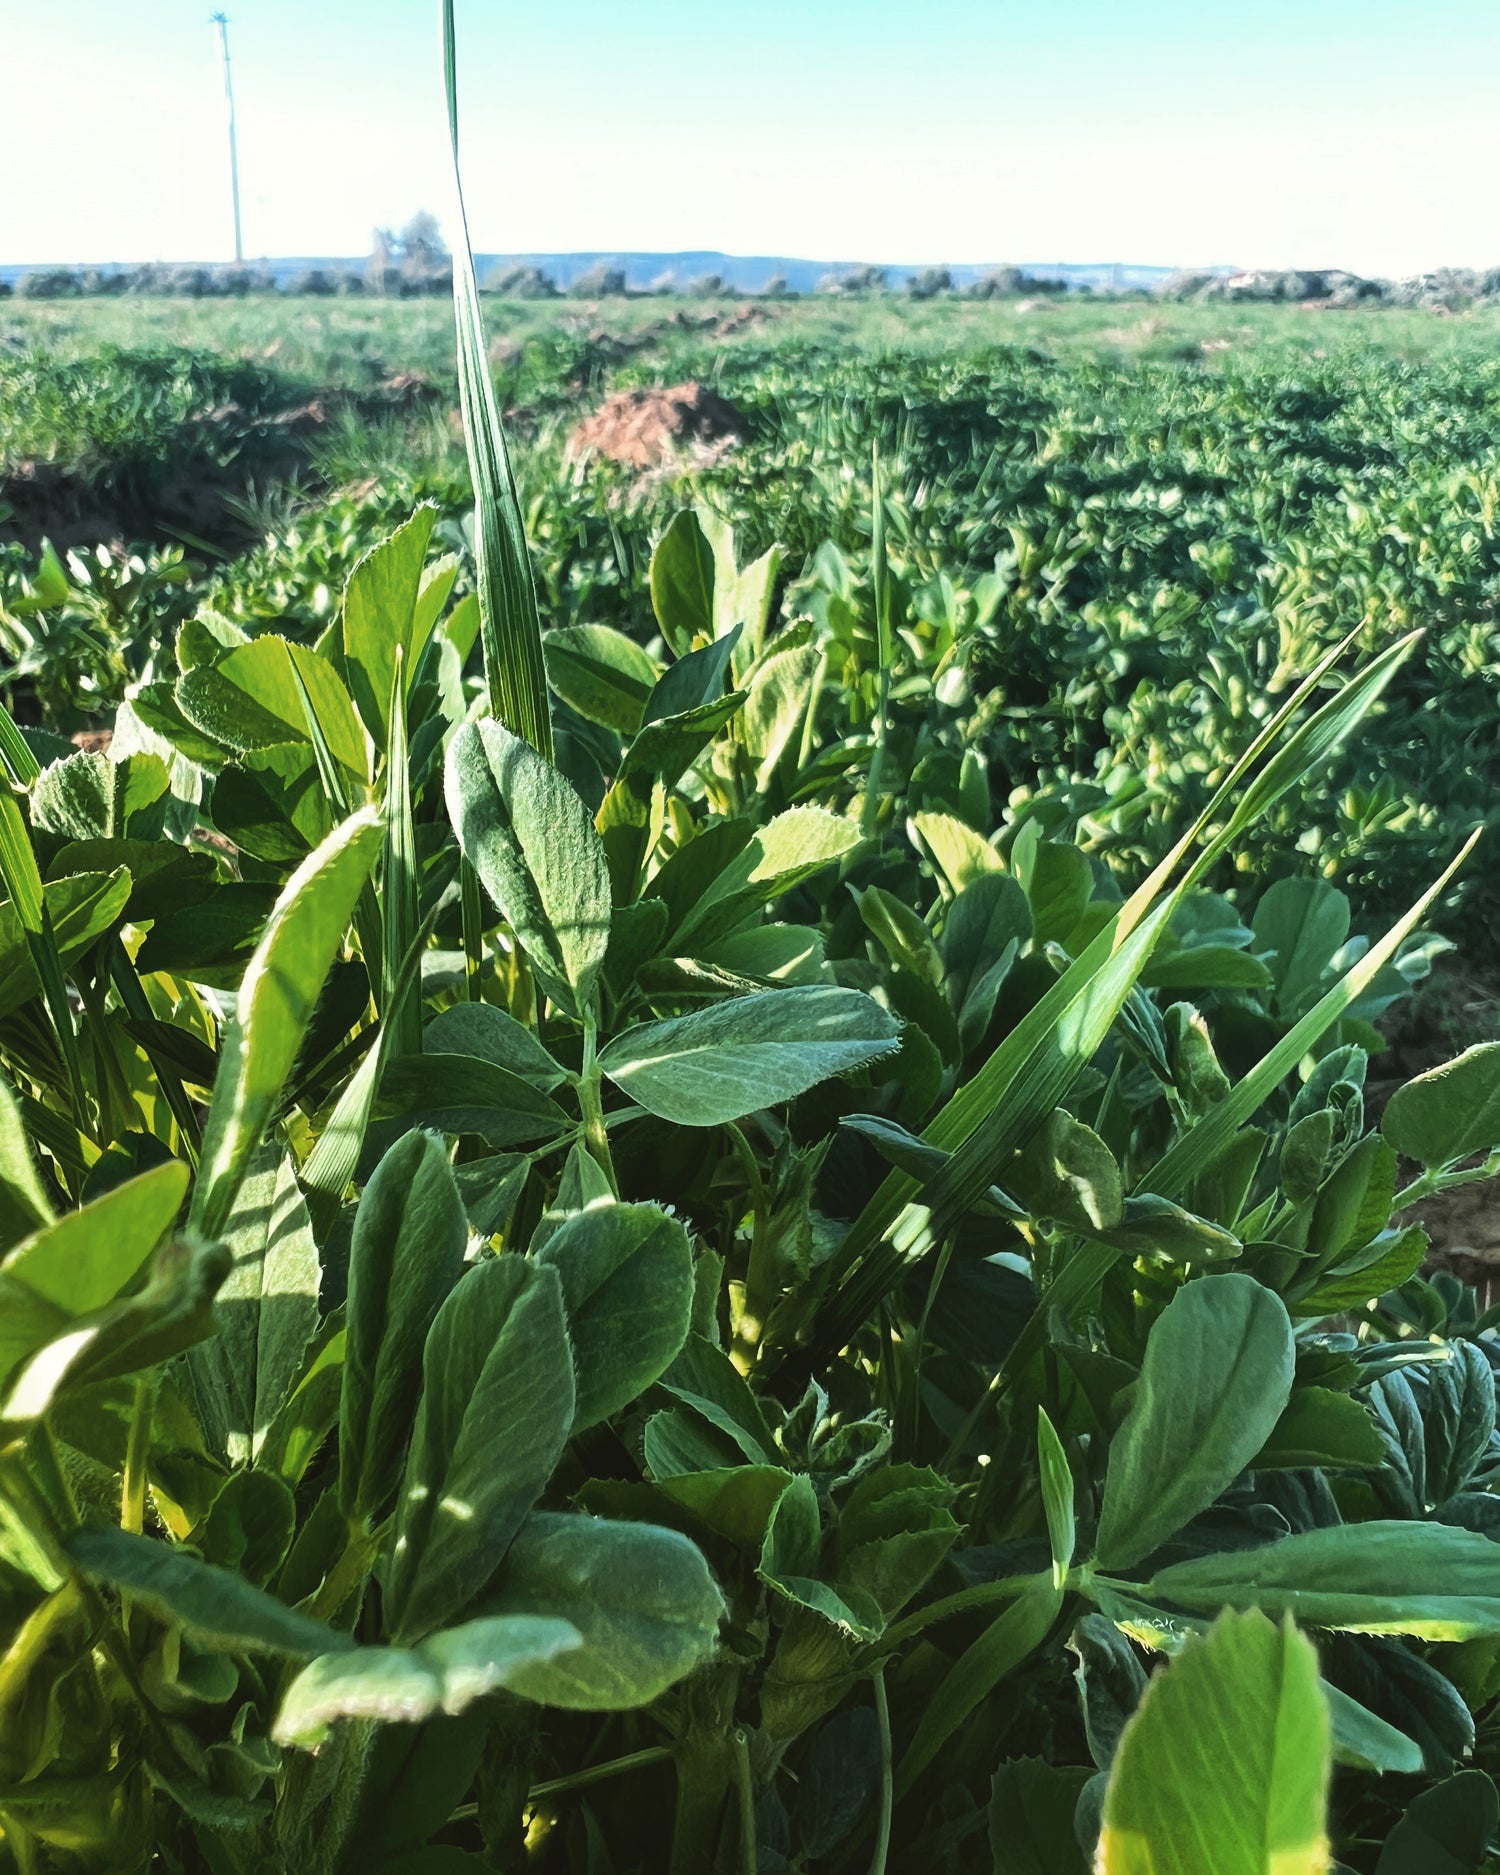 A vast, vibrant alfalfa field cultivated by Sacred Plant Co, showcasing the dedication to nurturing nutritious and sustainable crops.